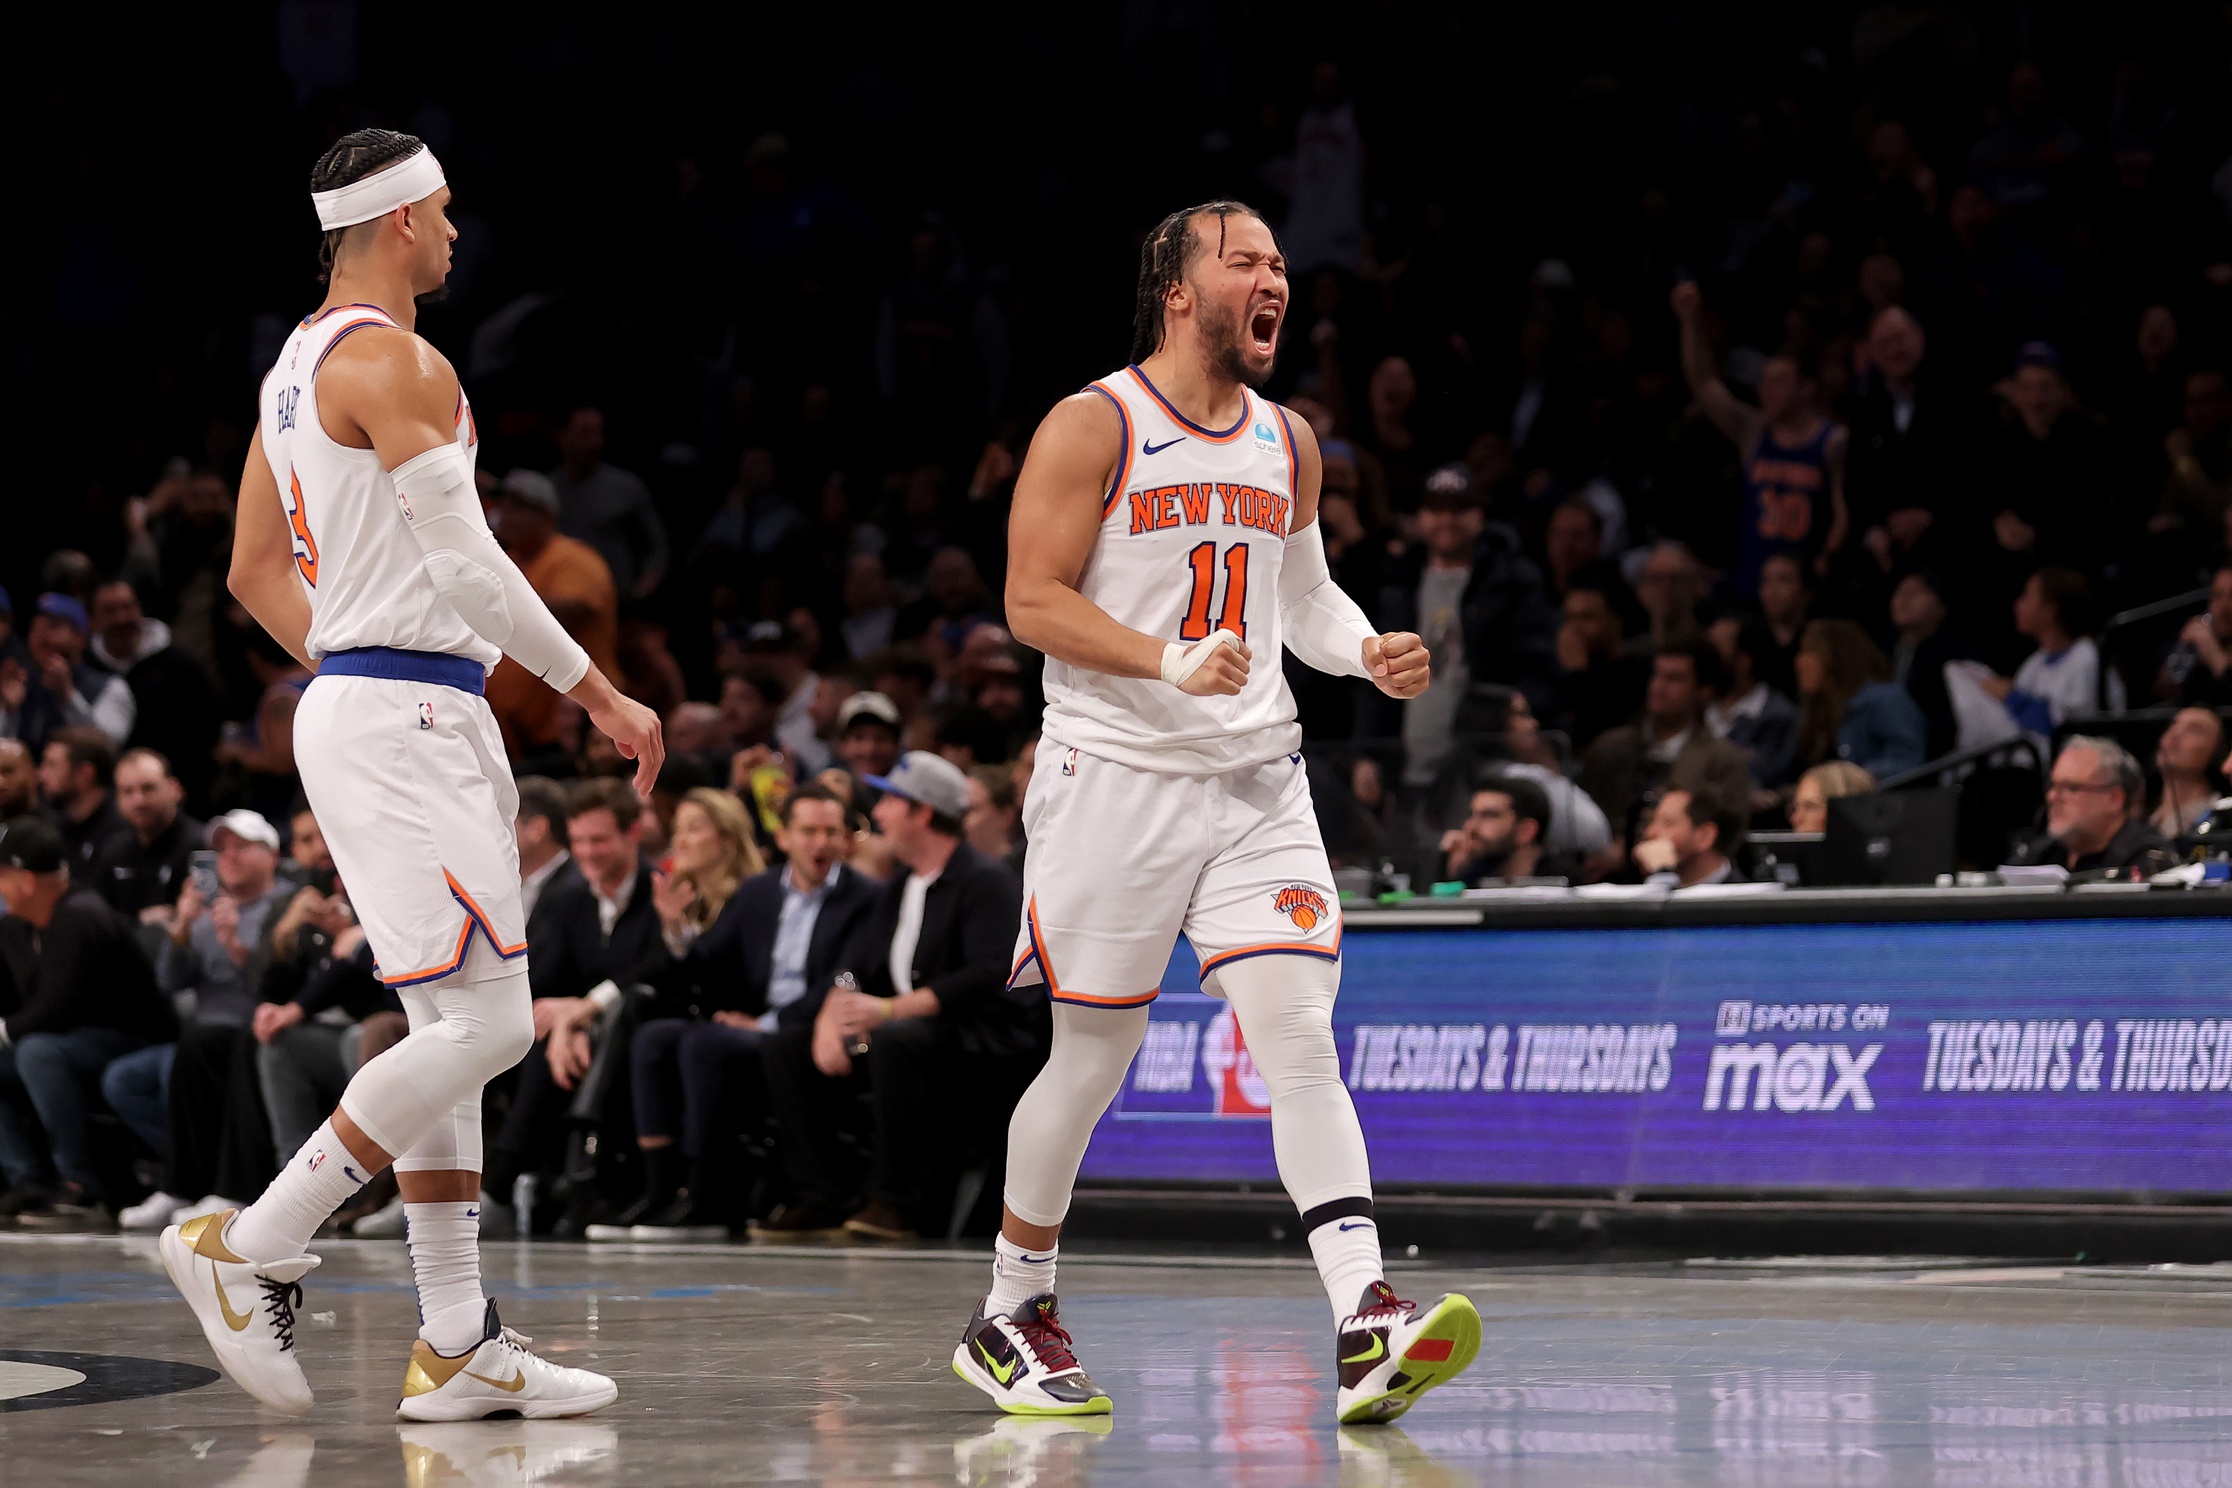 The Knicks had one of the best NBA offseasons.